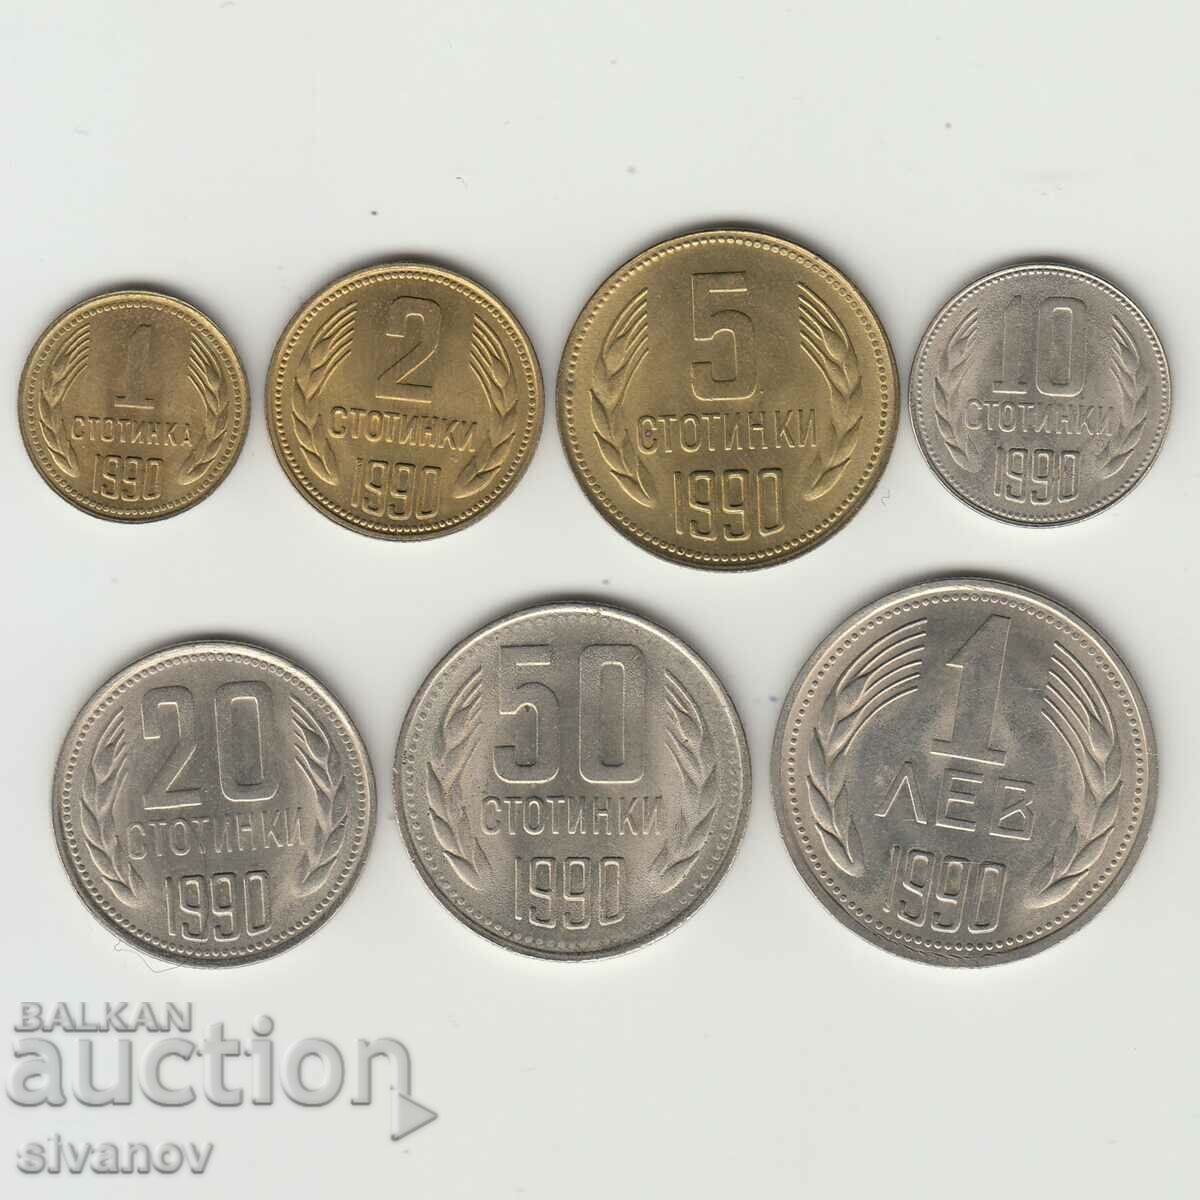 Bulgaria 1,2,5,10,20,50 cents and 1 lev 1990 #5399